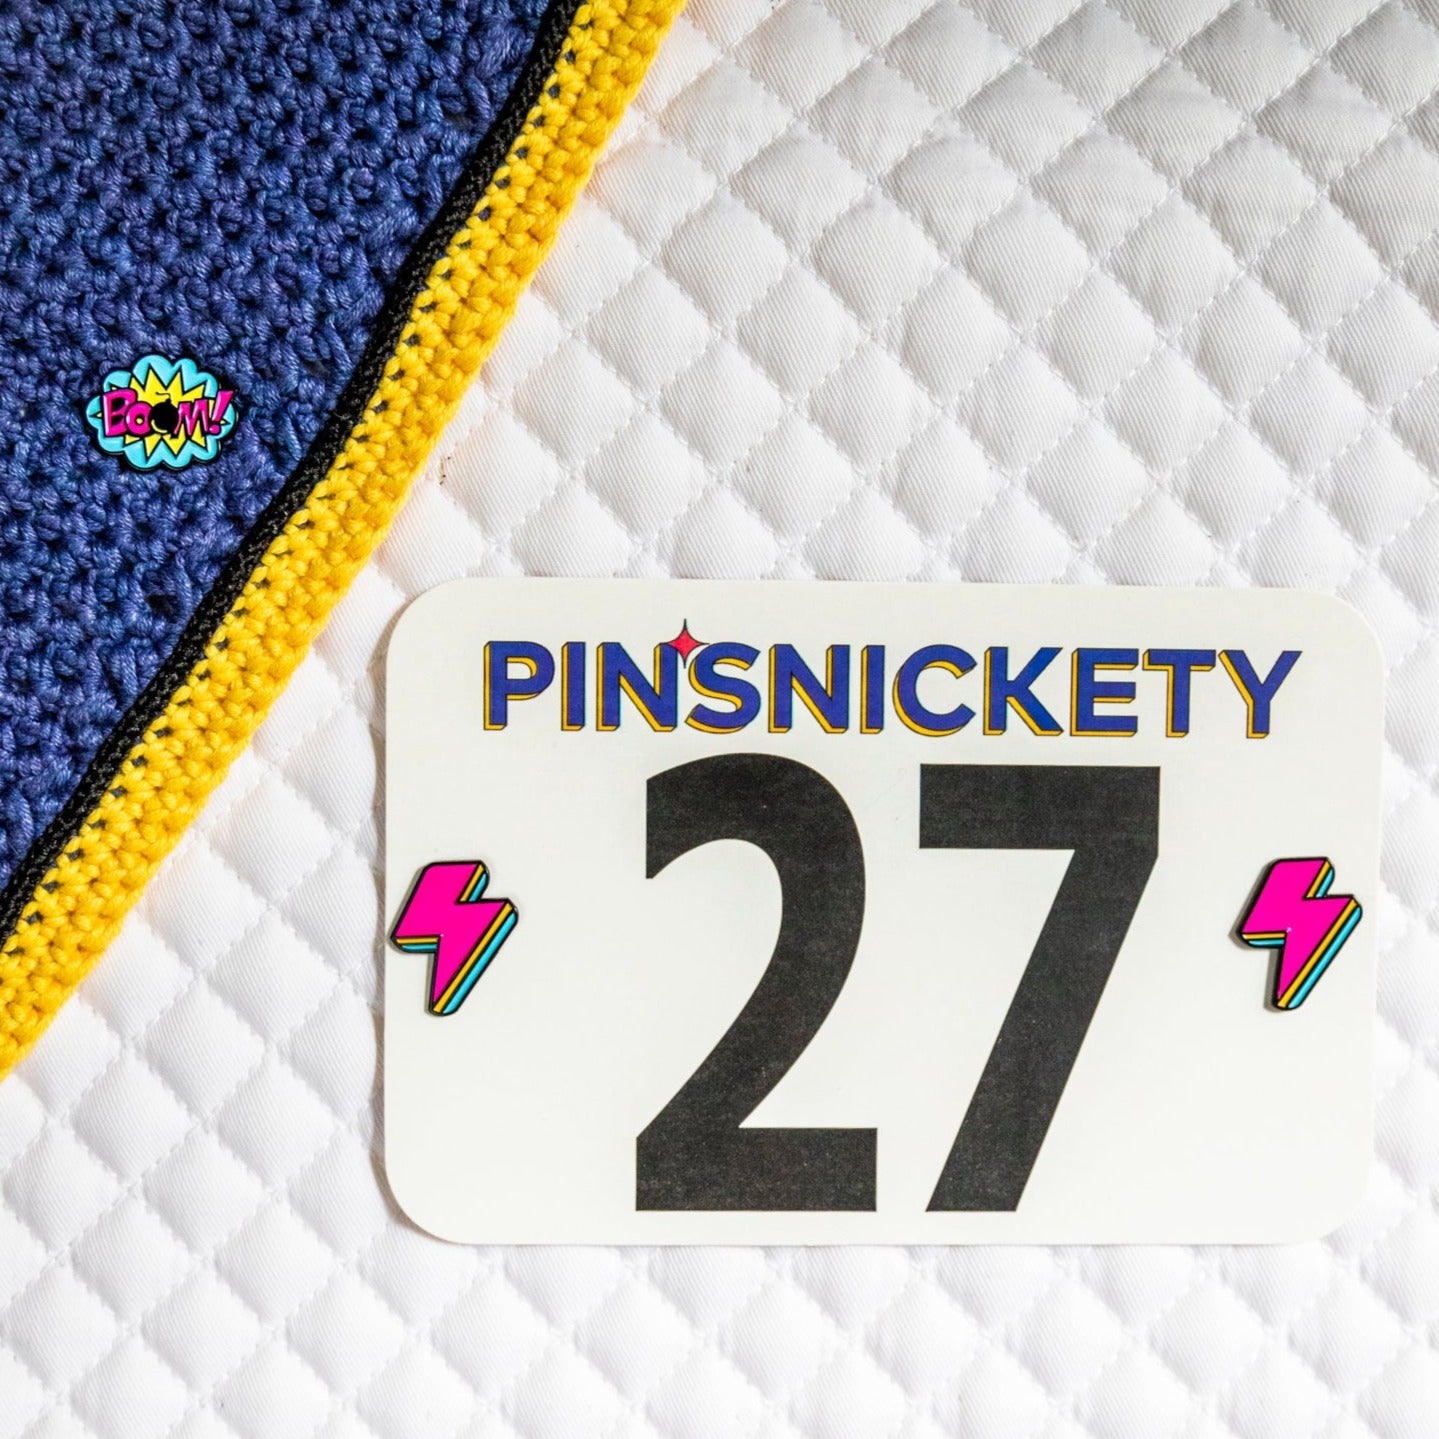 pinsnickety boom and lightning bolt horse show number pins on a bonnet and saddle pad.